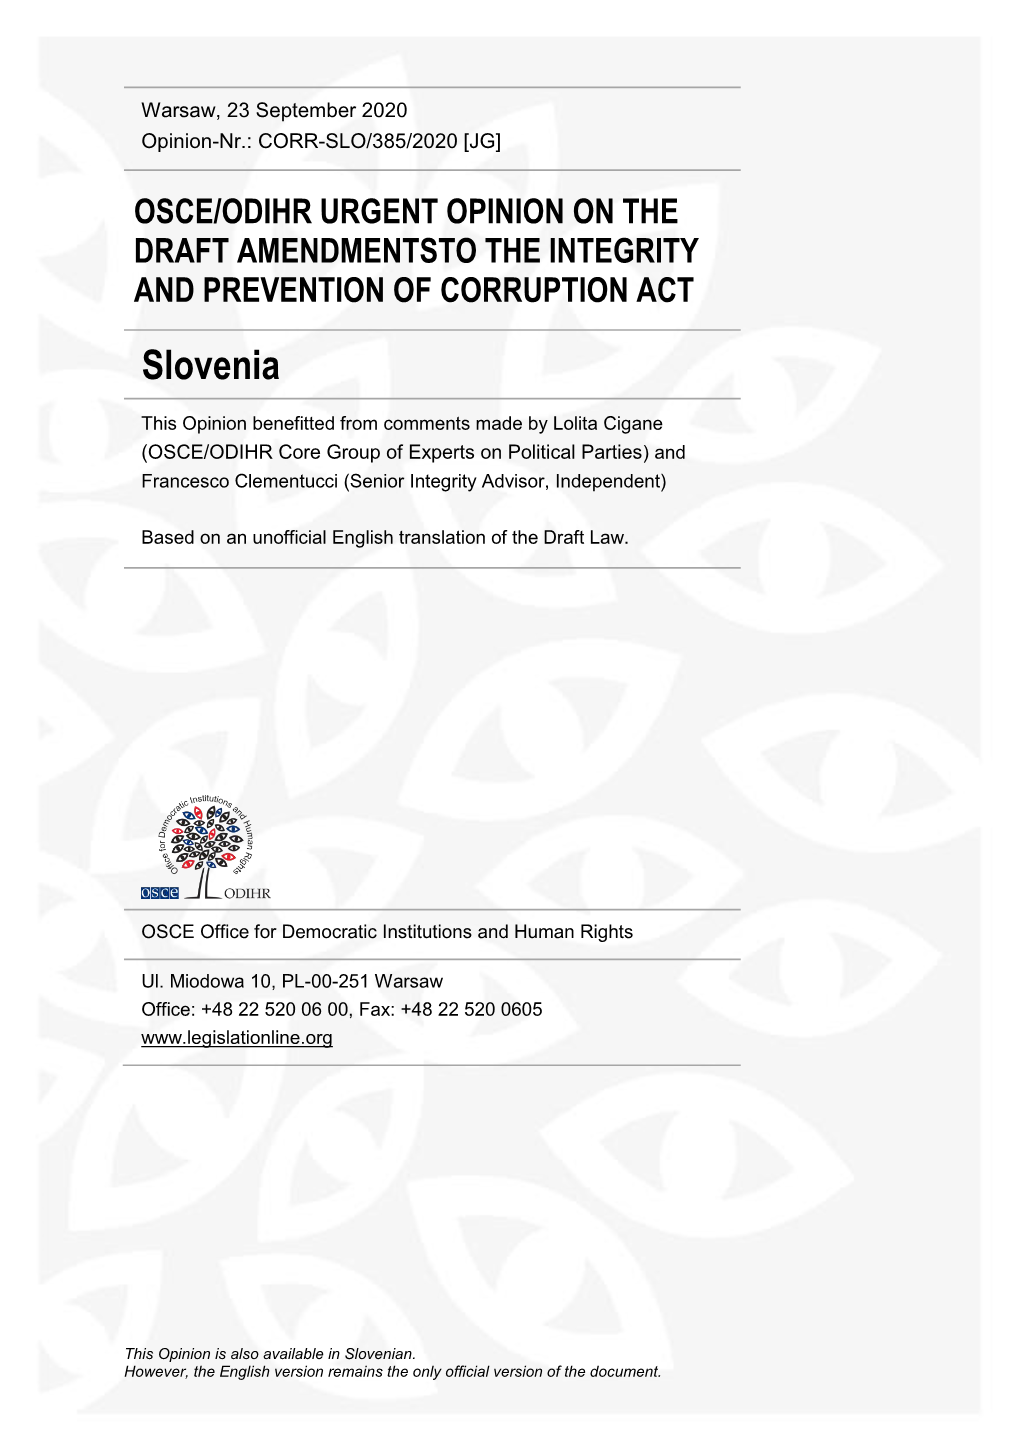 Urgent Opinion on the Draft Amendments to the Integrity and Prevention of Corruption Act of the Republic of Slovenia